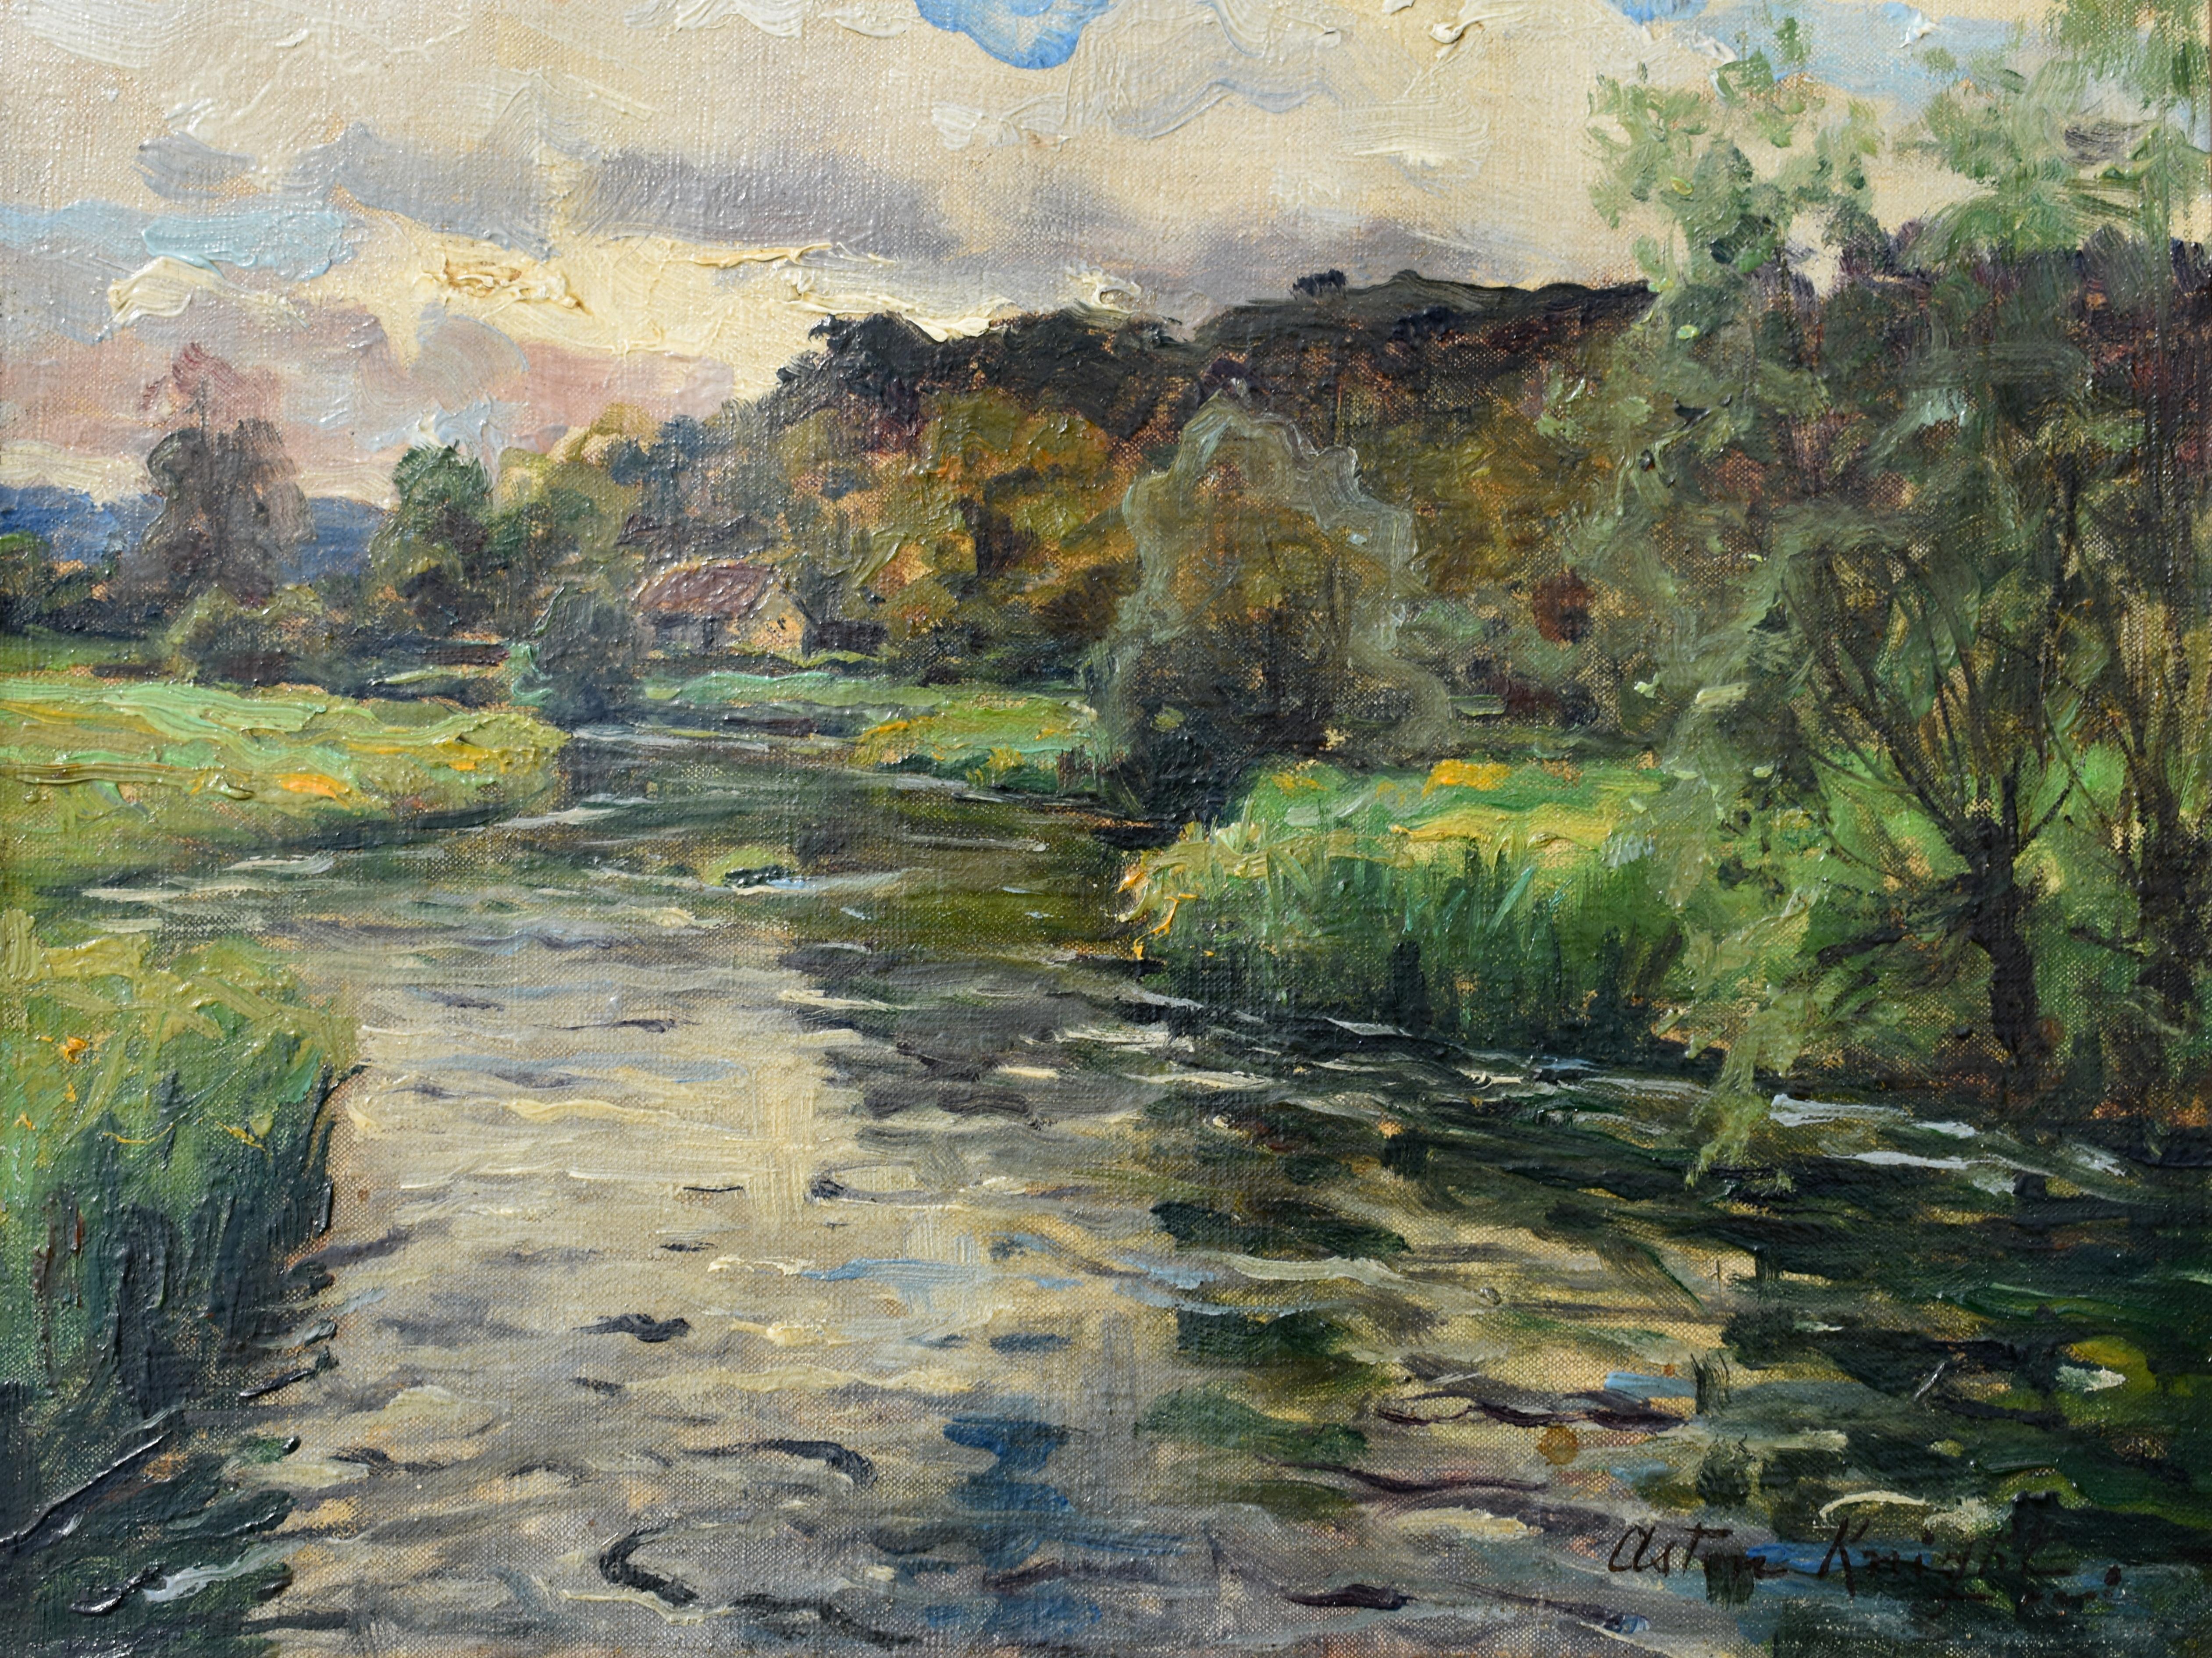 Louis Aston KNIGHT (1873-1948)

A languid stream in a verdant green landscape by the well recorded Franco American artist Louis Aston Knight.

*Louis Aston Knight was a French-born American artist noted for his paintings of landscapes, in particular